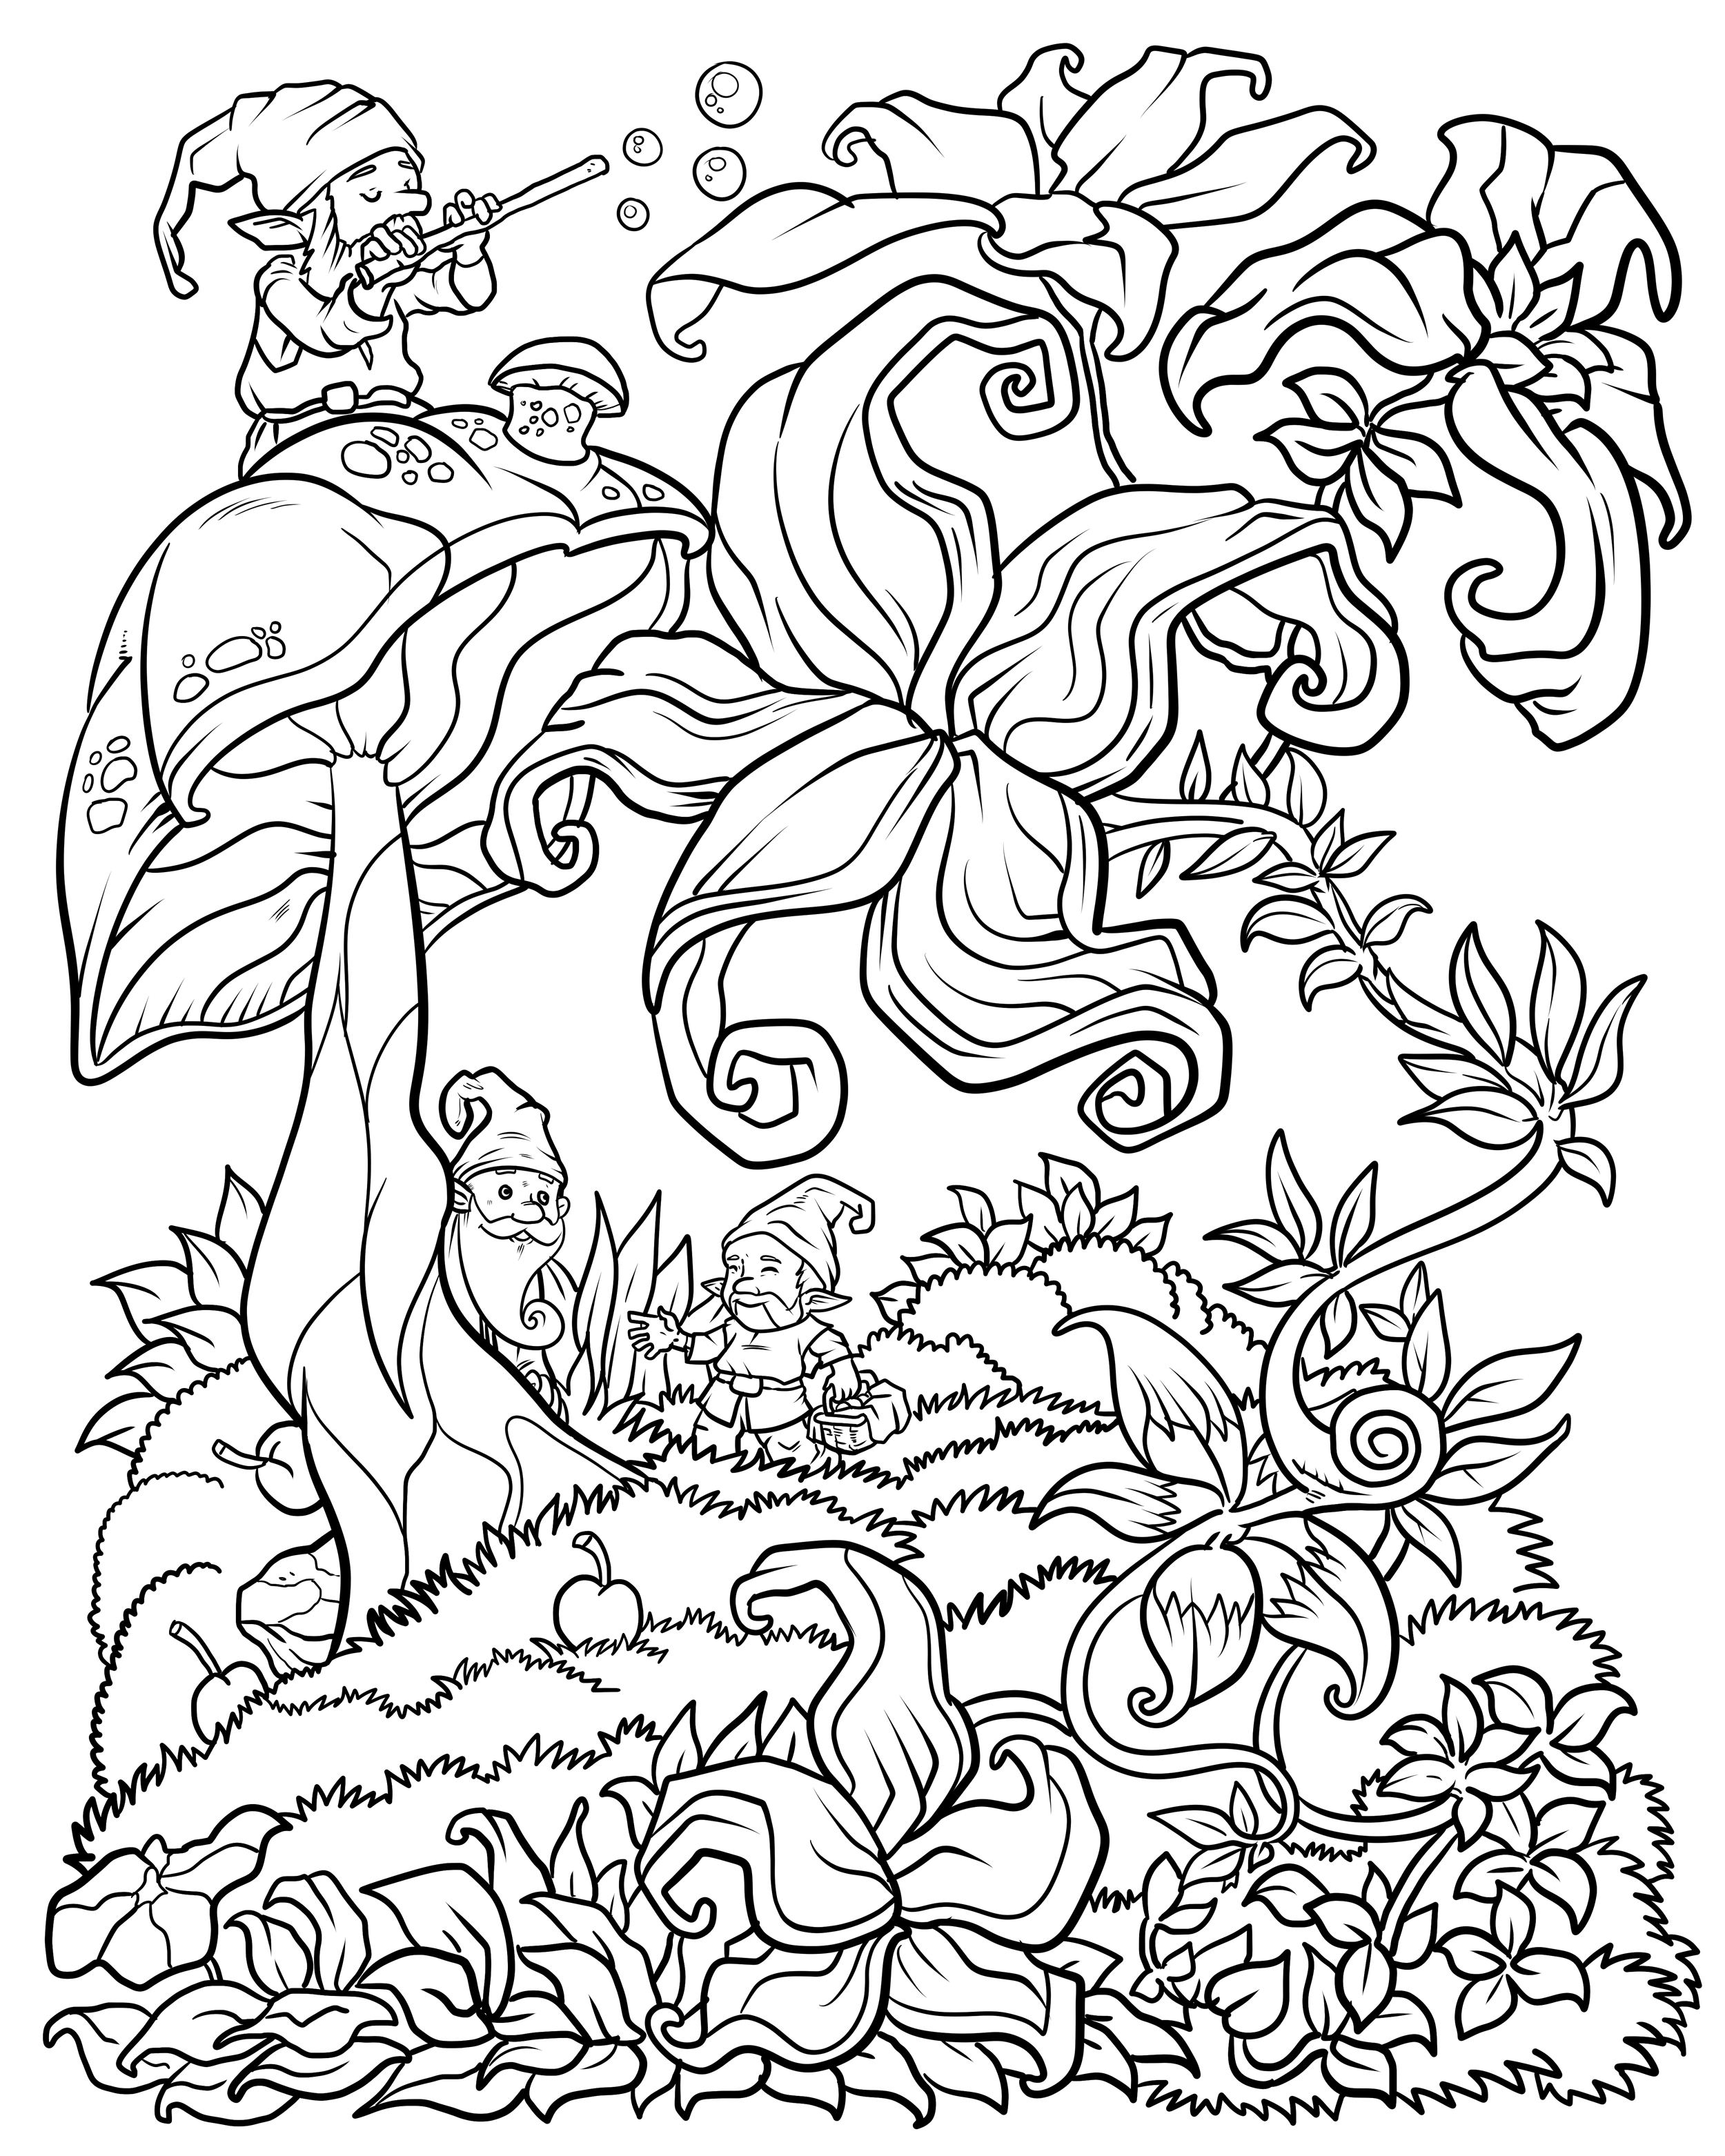 Best Free Coloring Pages Online